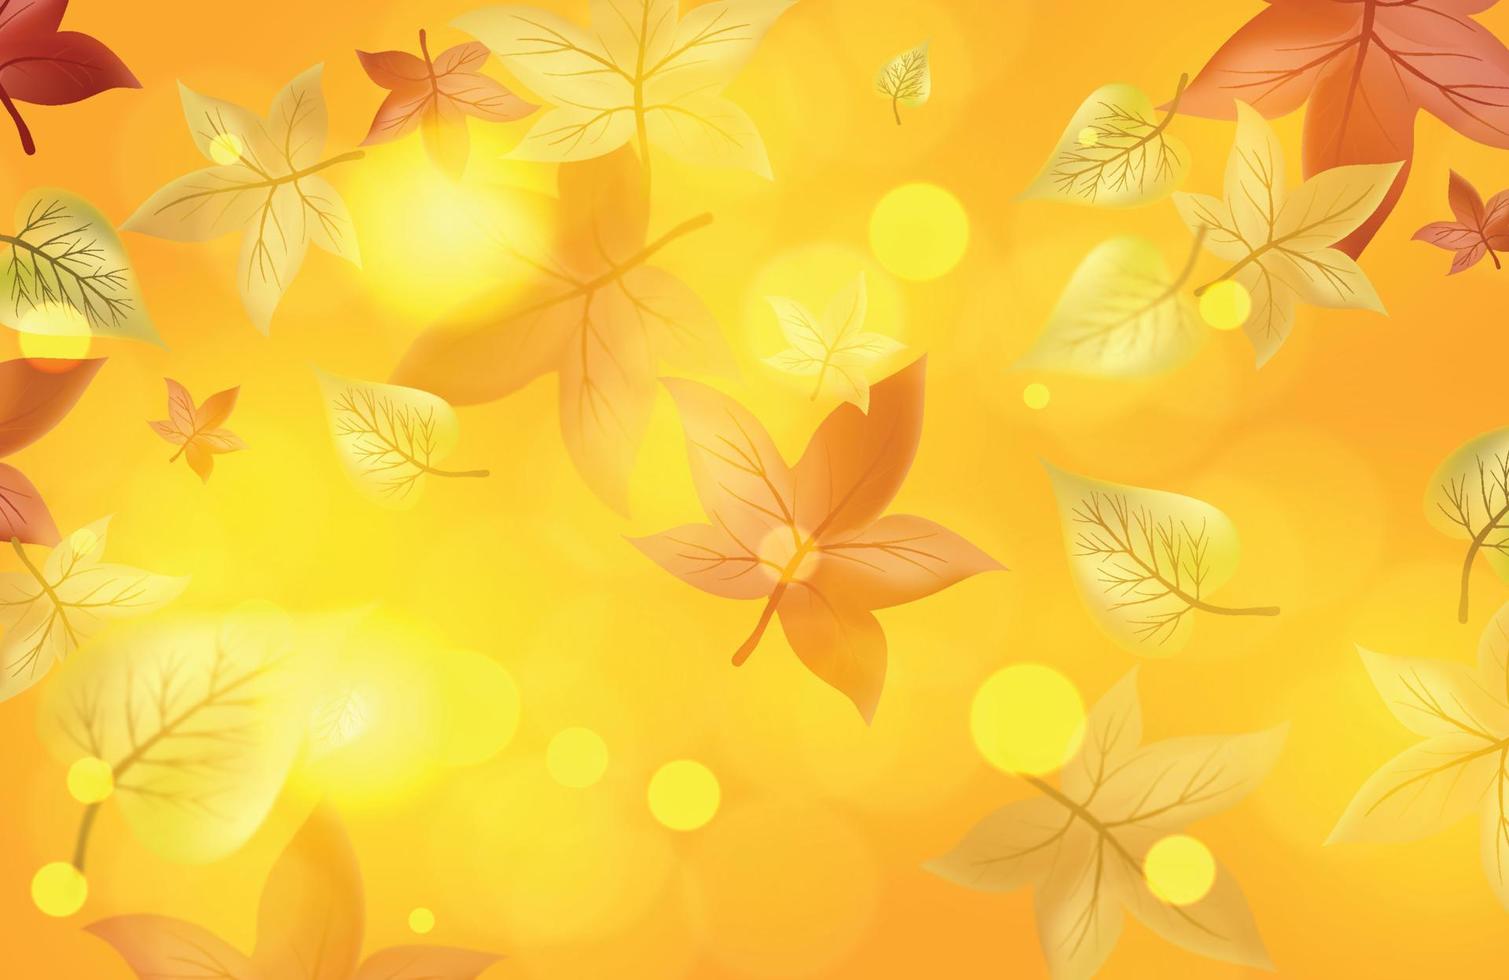 Autumn background with yellow leaves vector